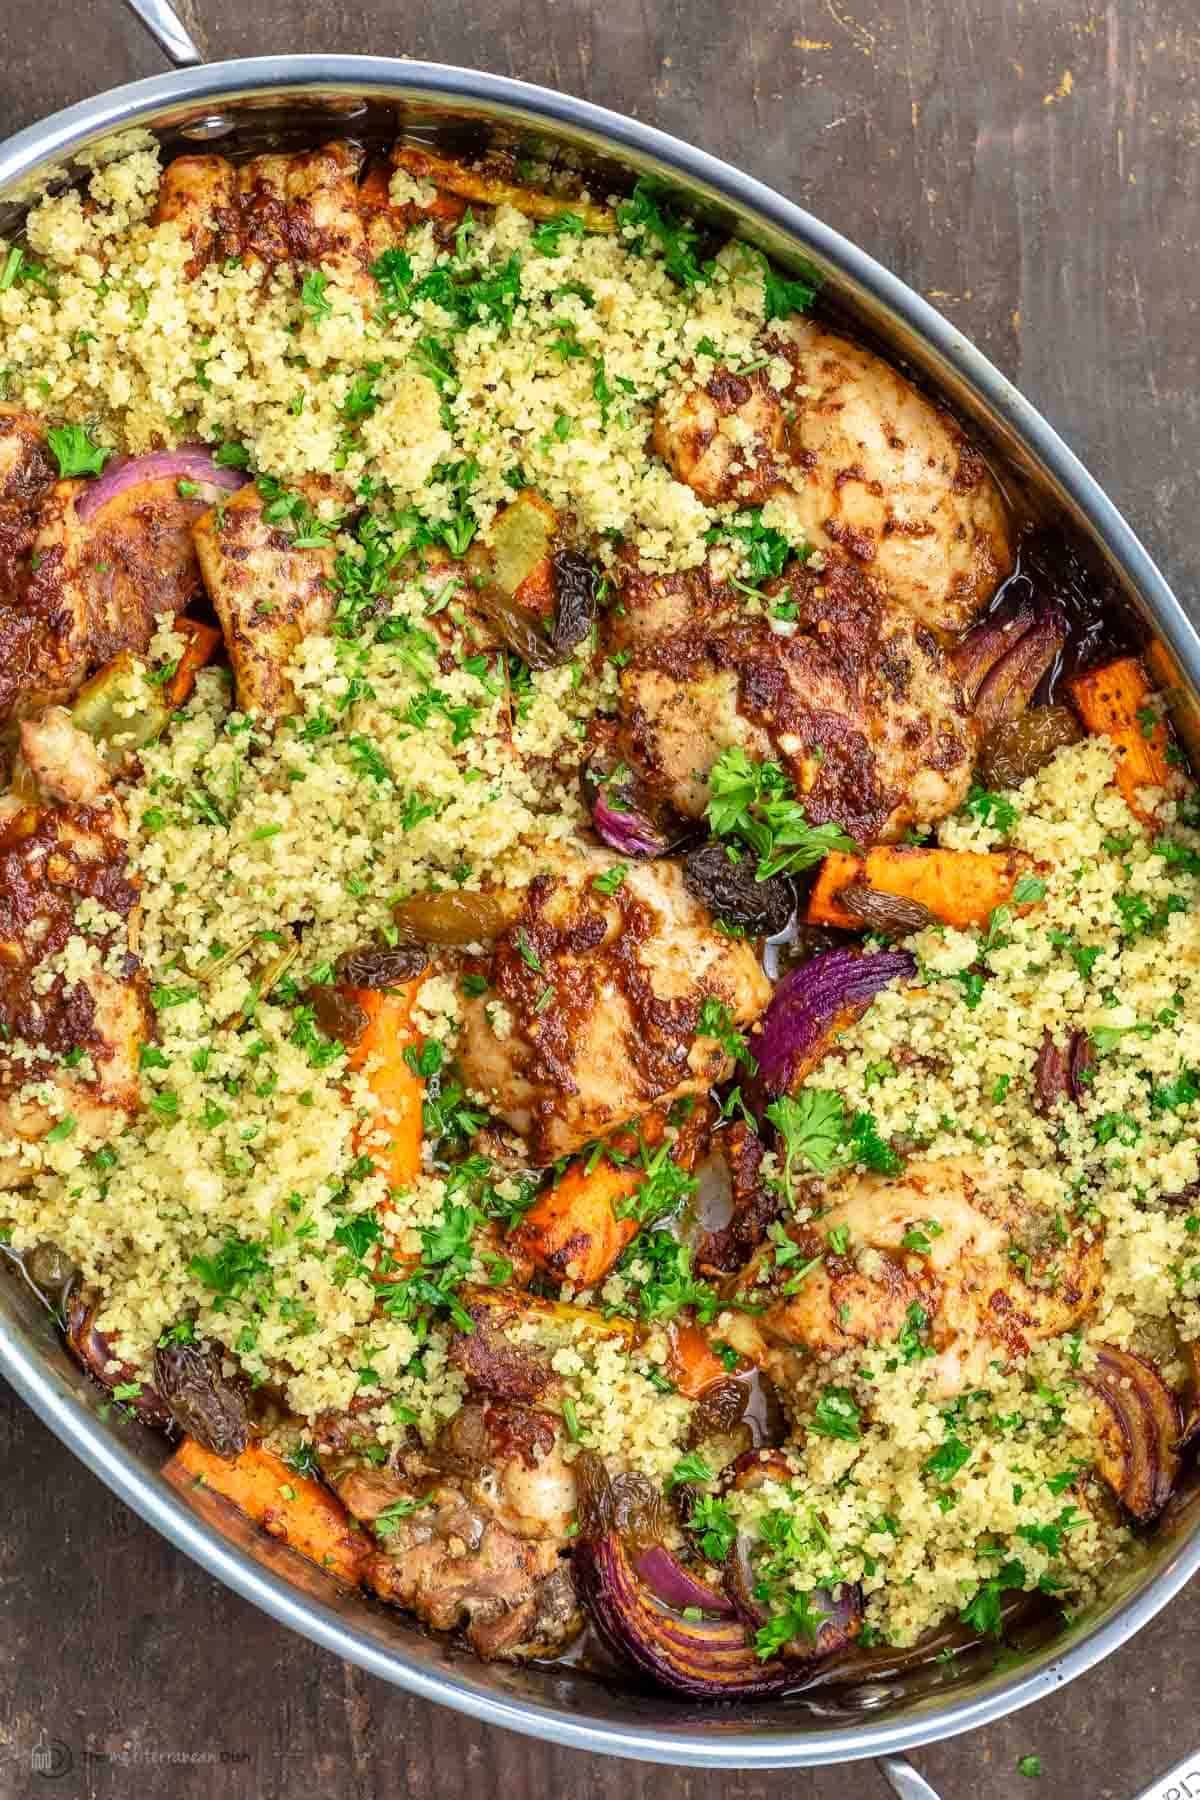 Chicken with Couscous Recipe